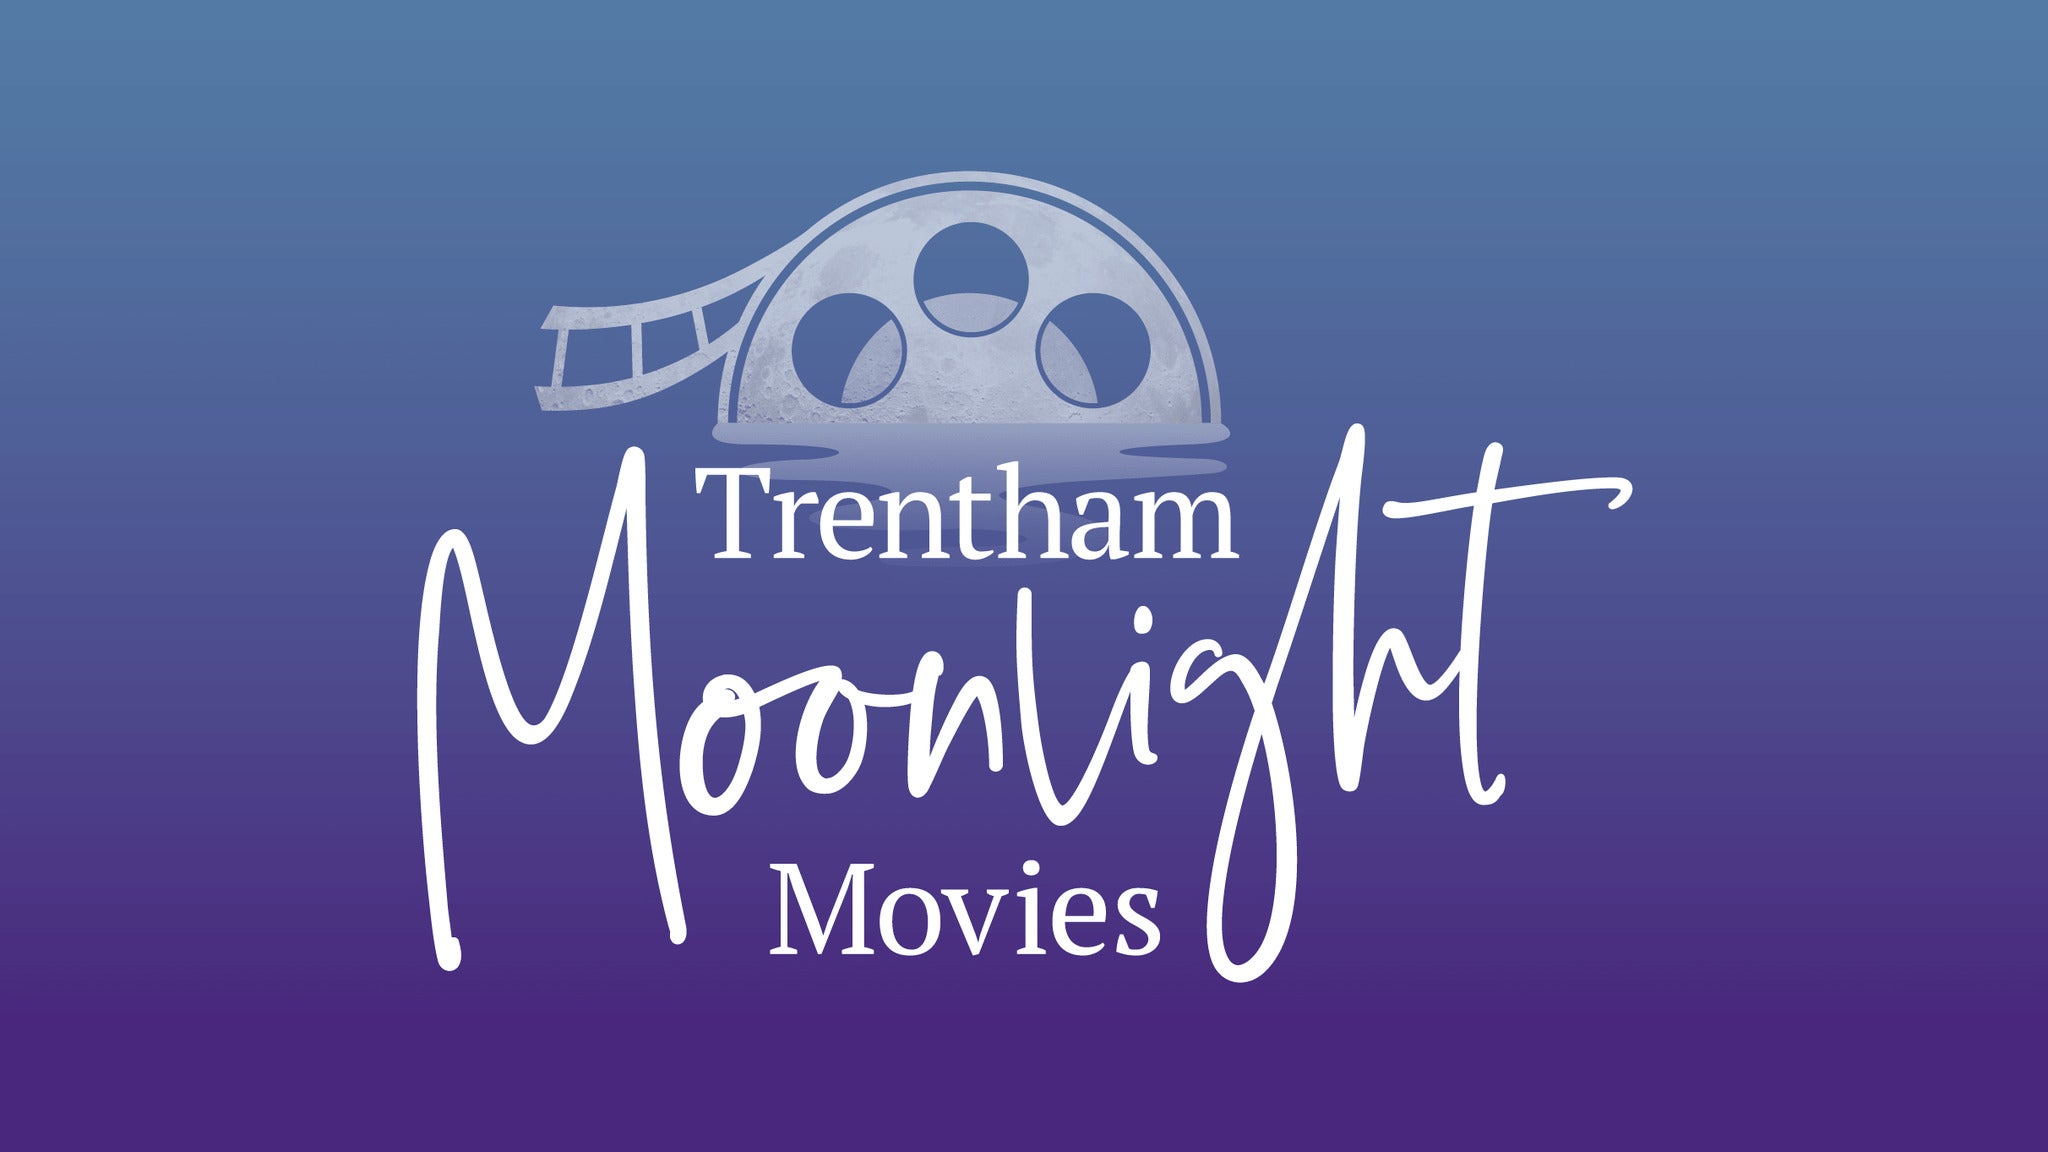 Trentham Moonlight Movies - Dirty Dancing (12a) Event Title Pic